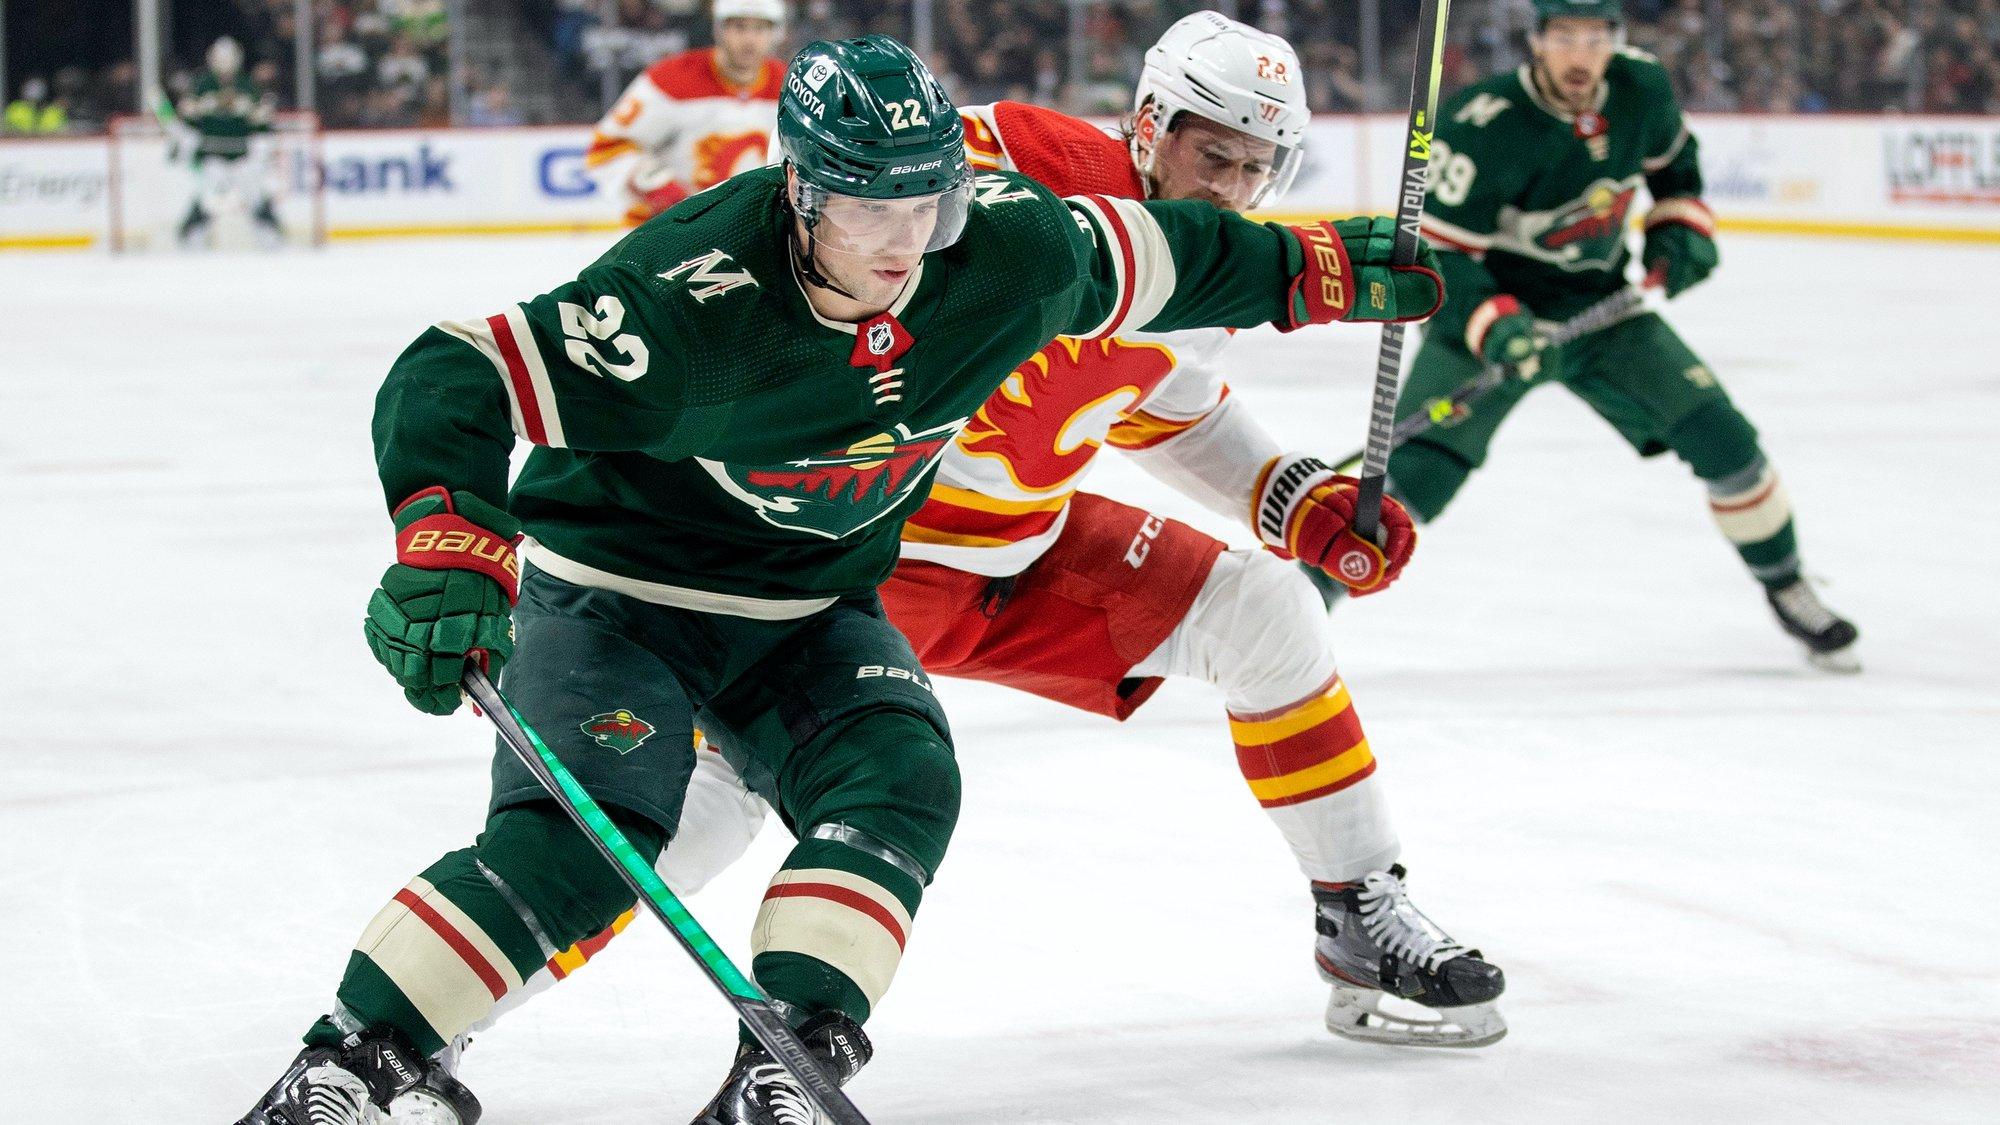 Eriksson-Ek has been the Wild's most important center and a top point producer